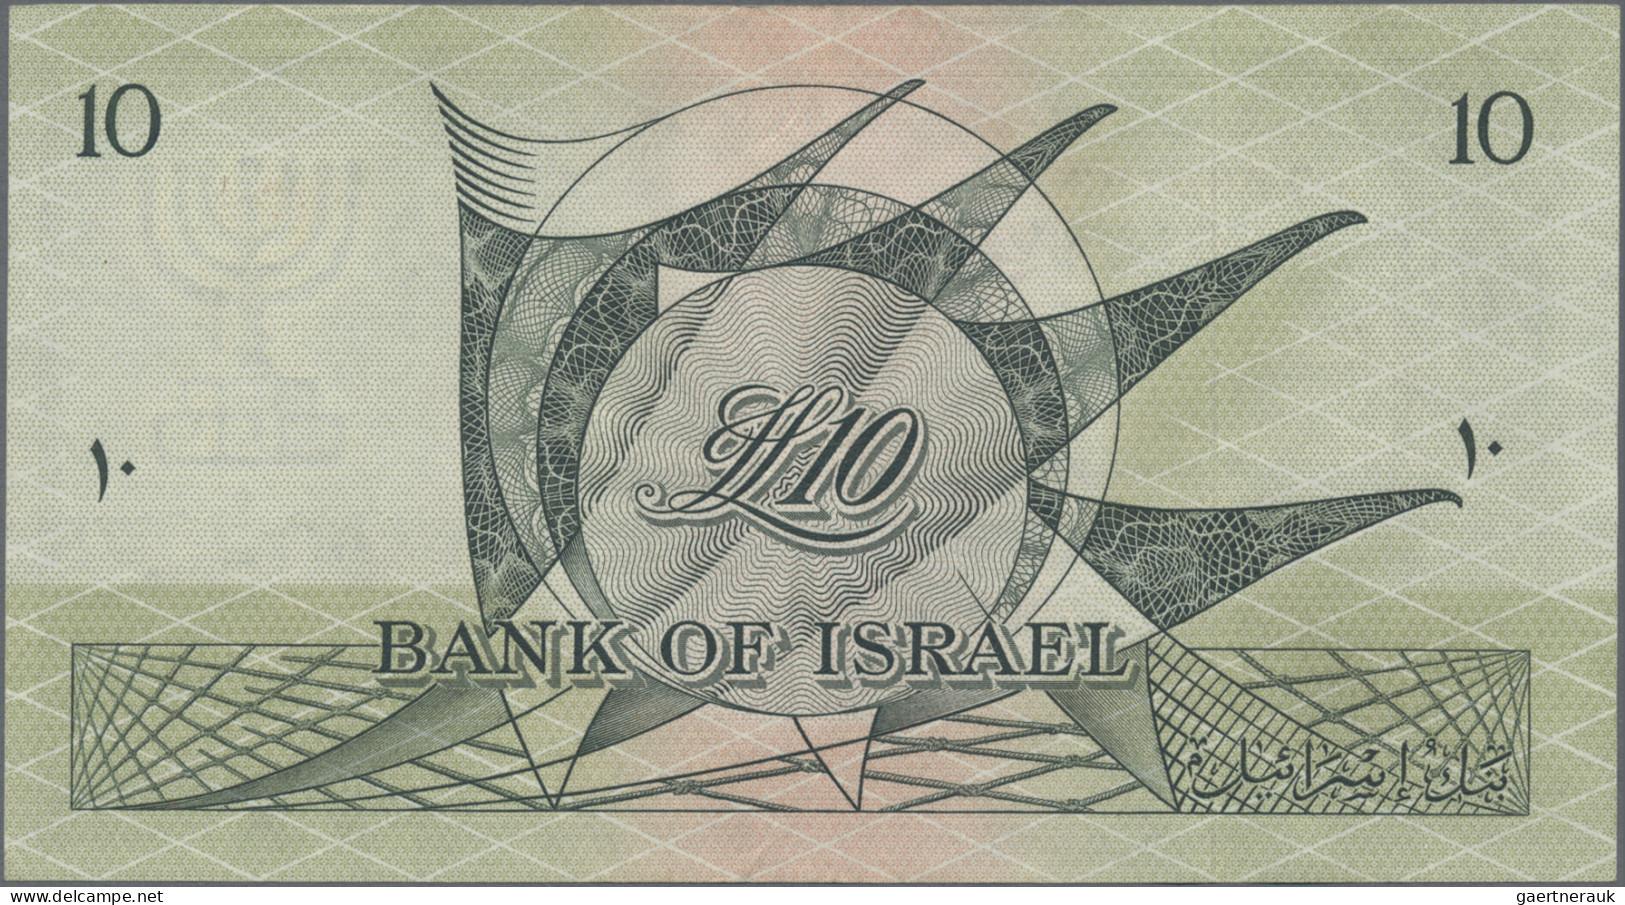 Israel: Bank of Israel, set with 4 banknotes, 1955 series, with 500 Pruta (P.24a